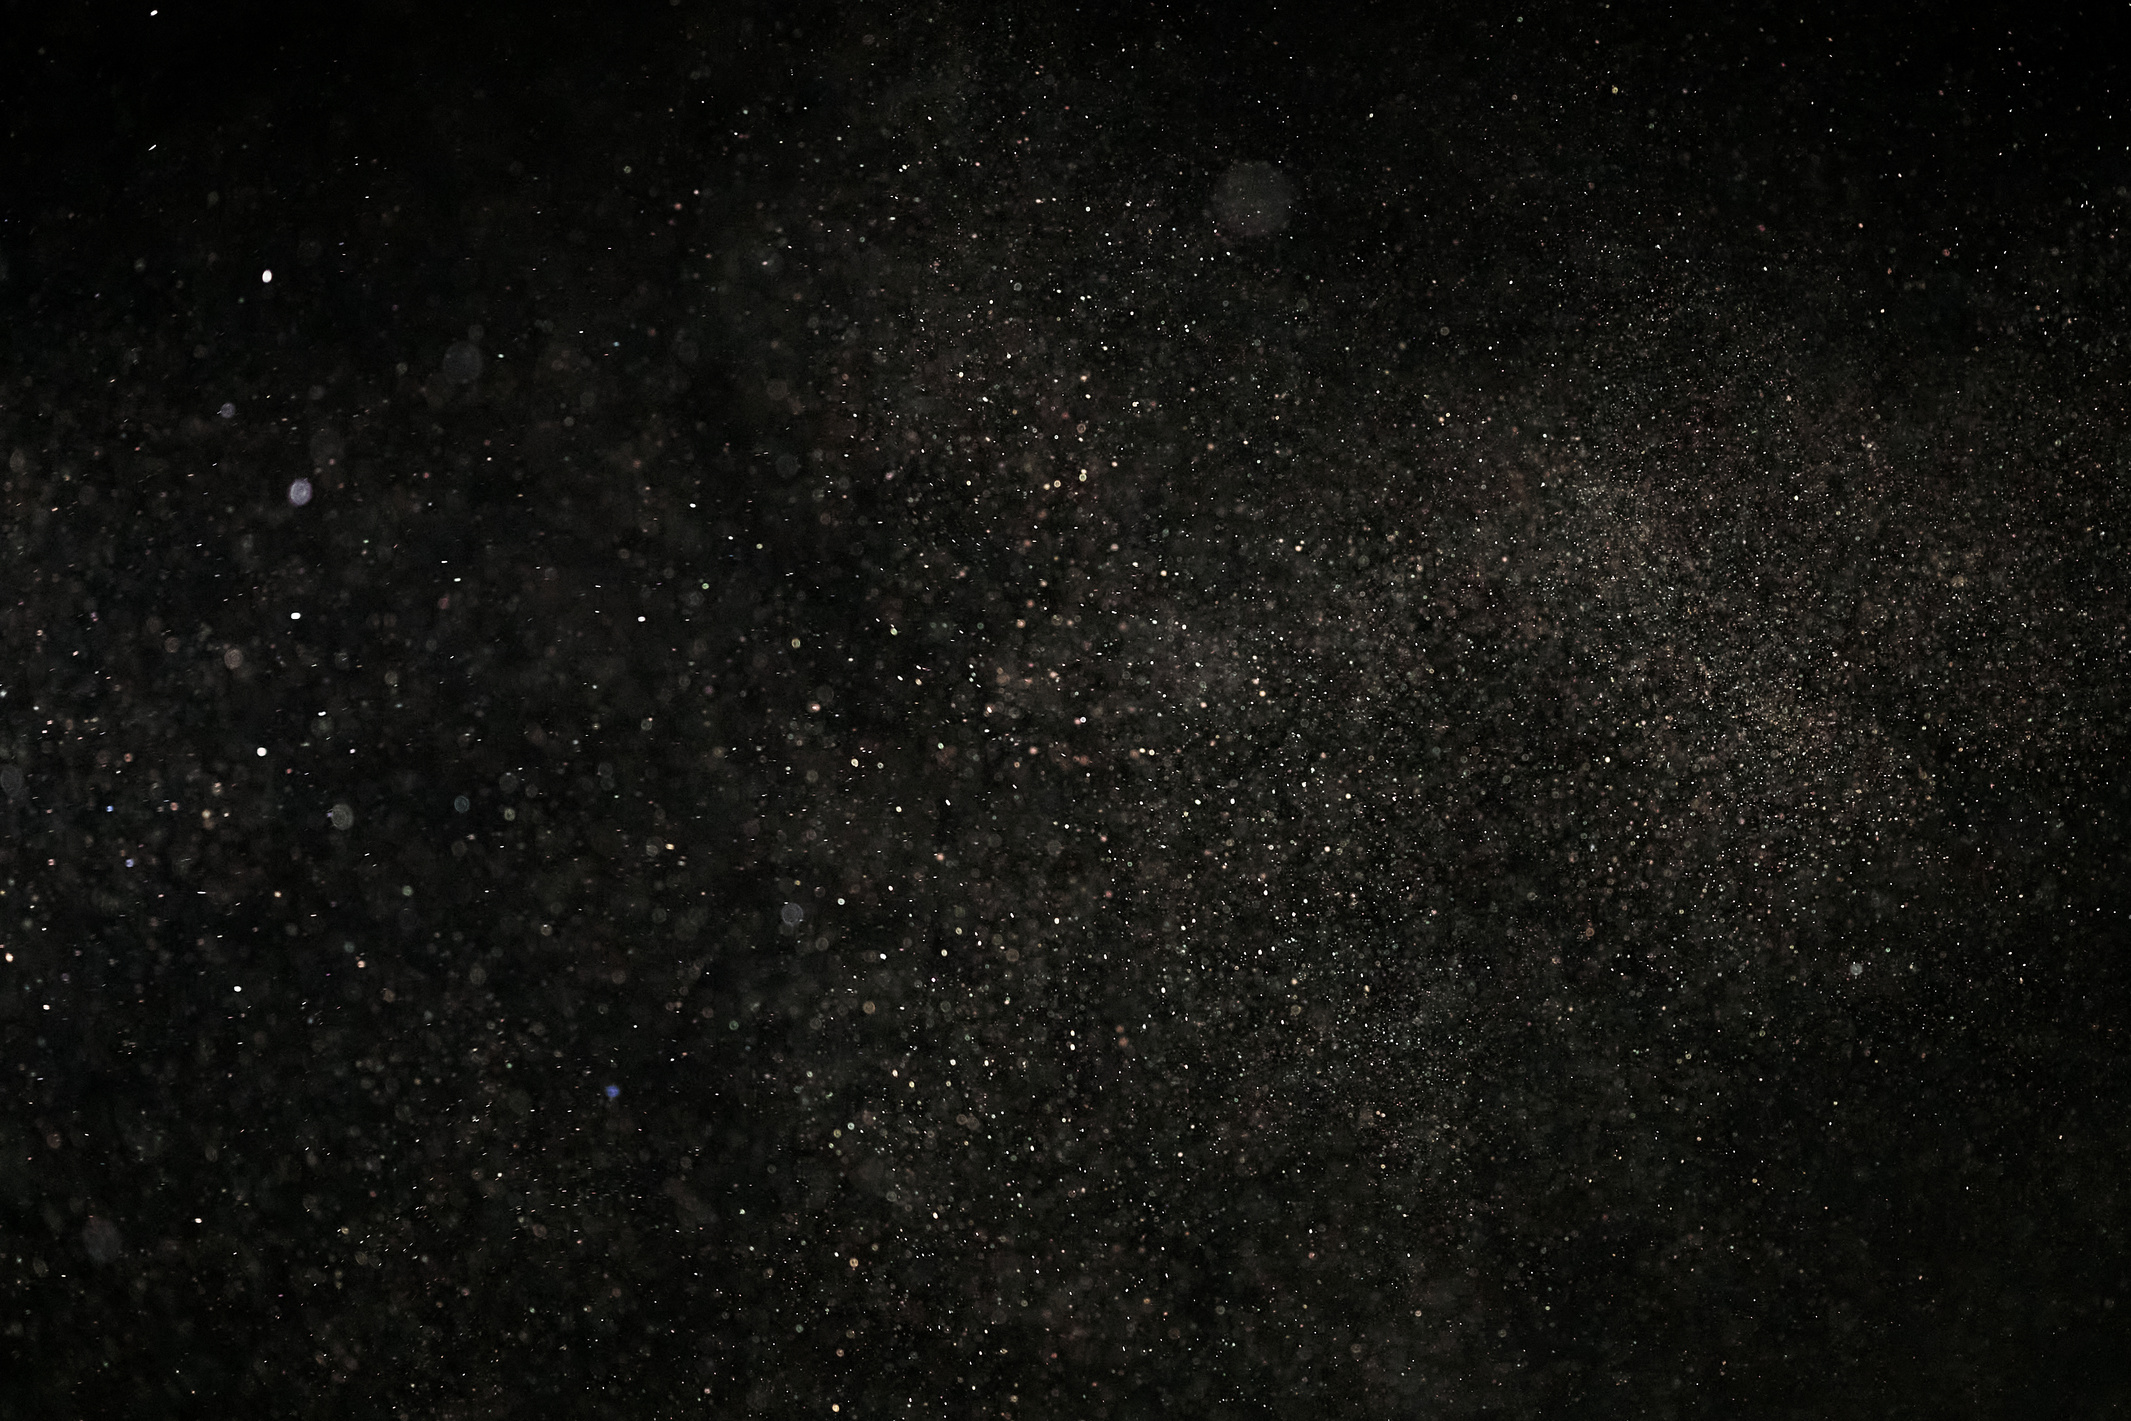 White Dust Particles on Black Background